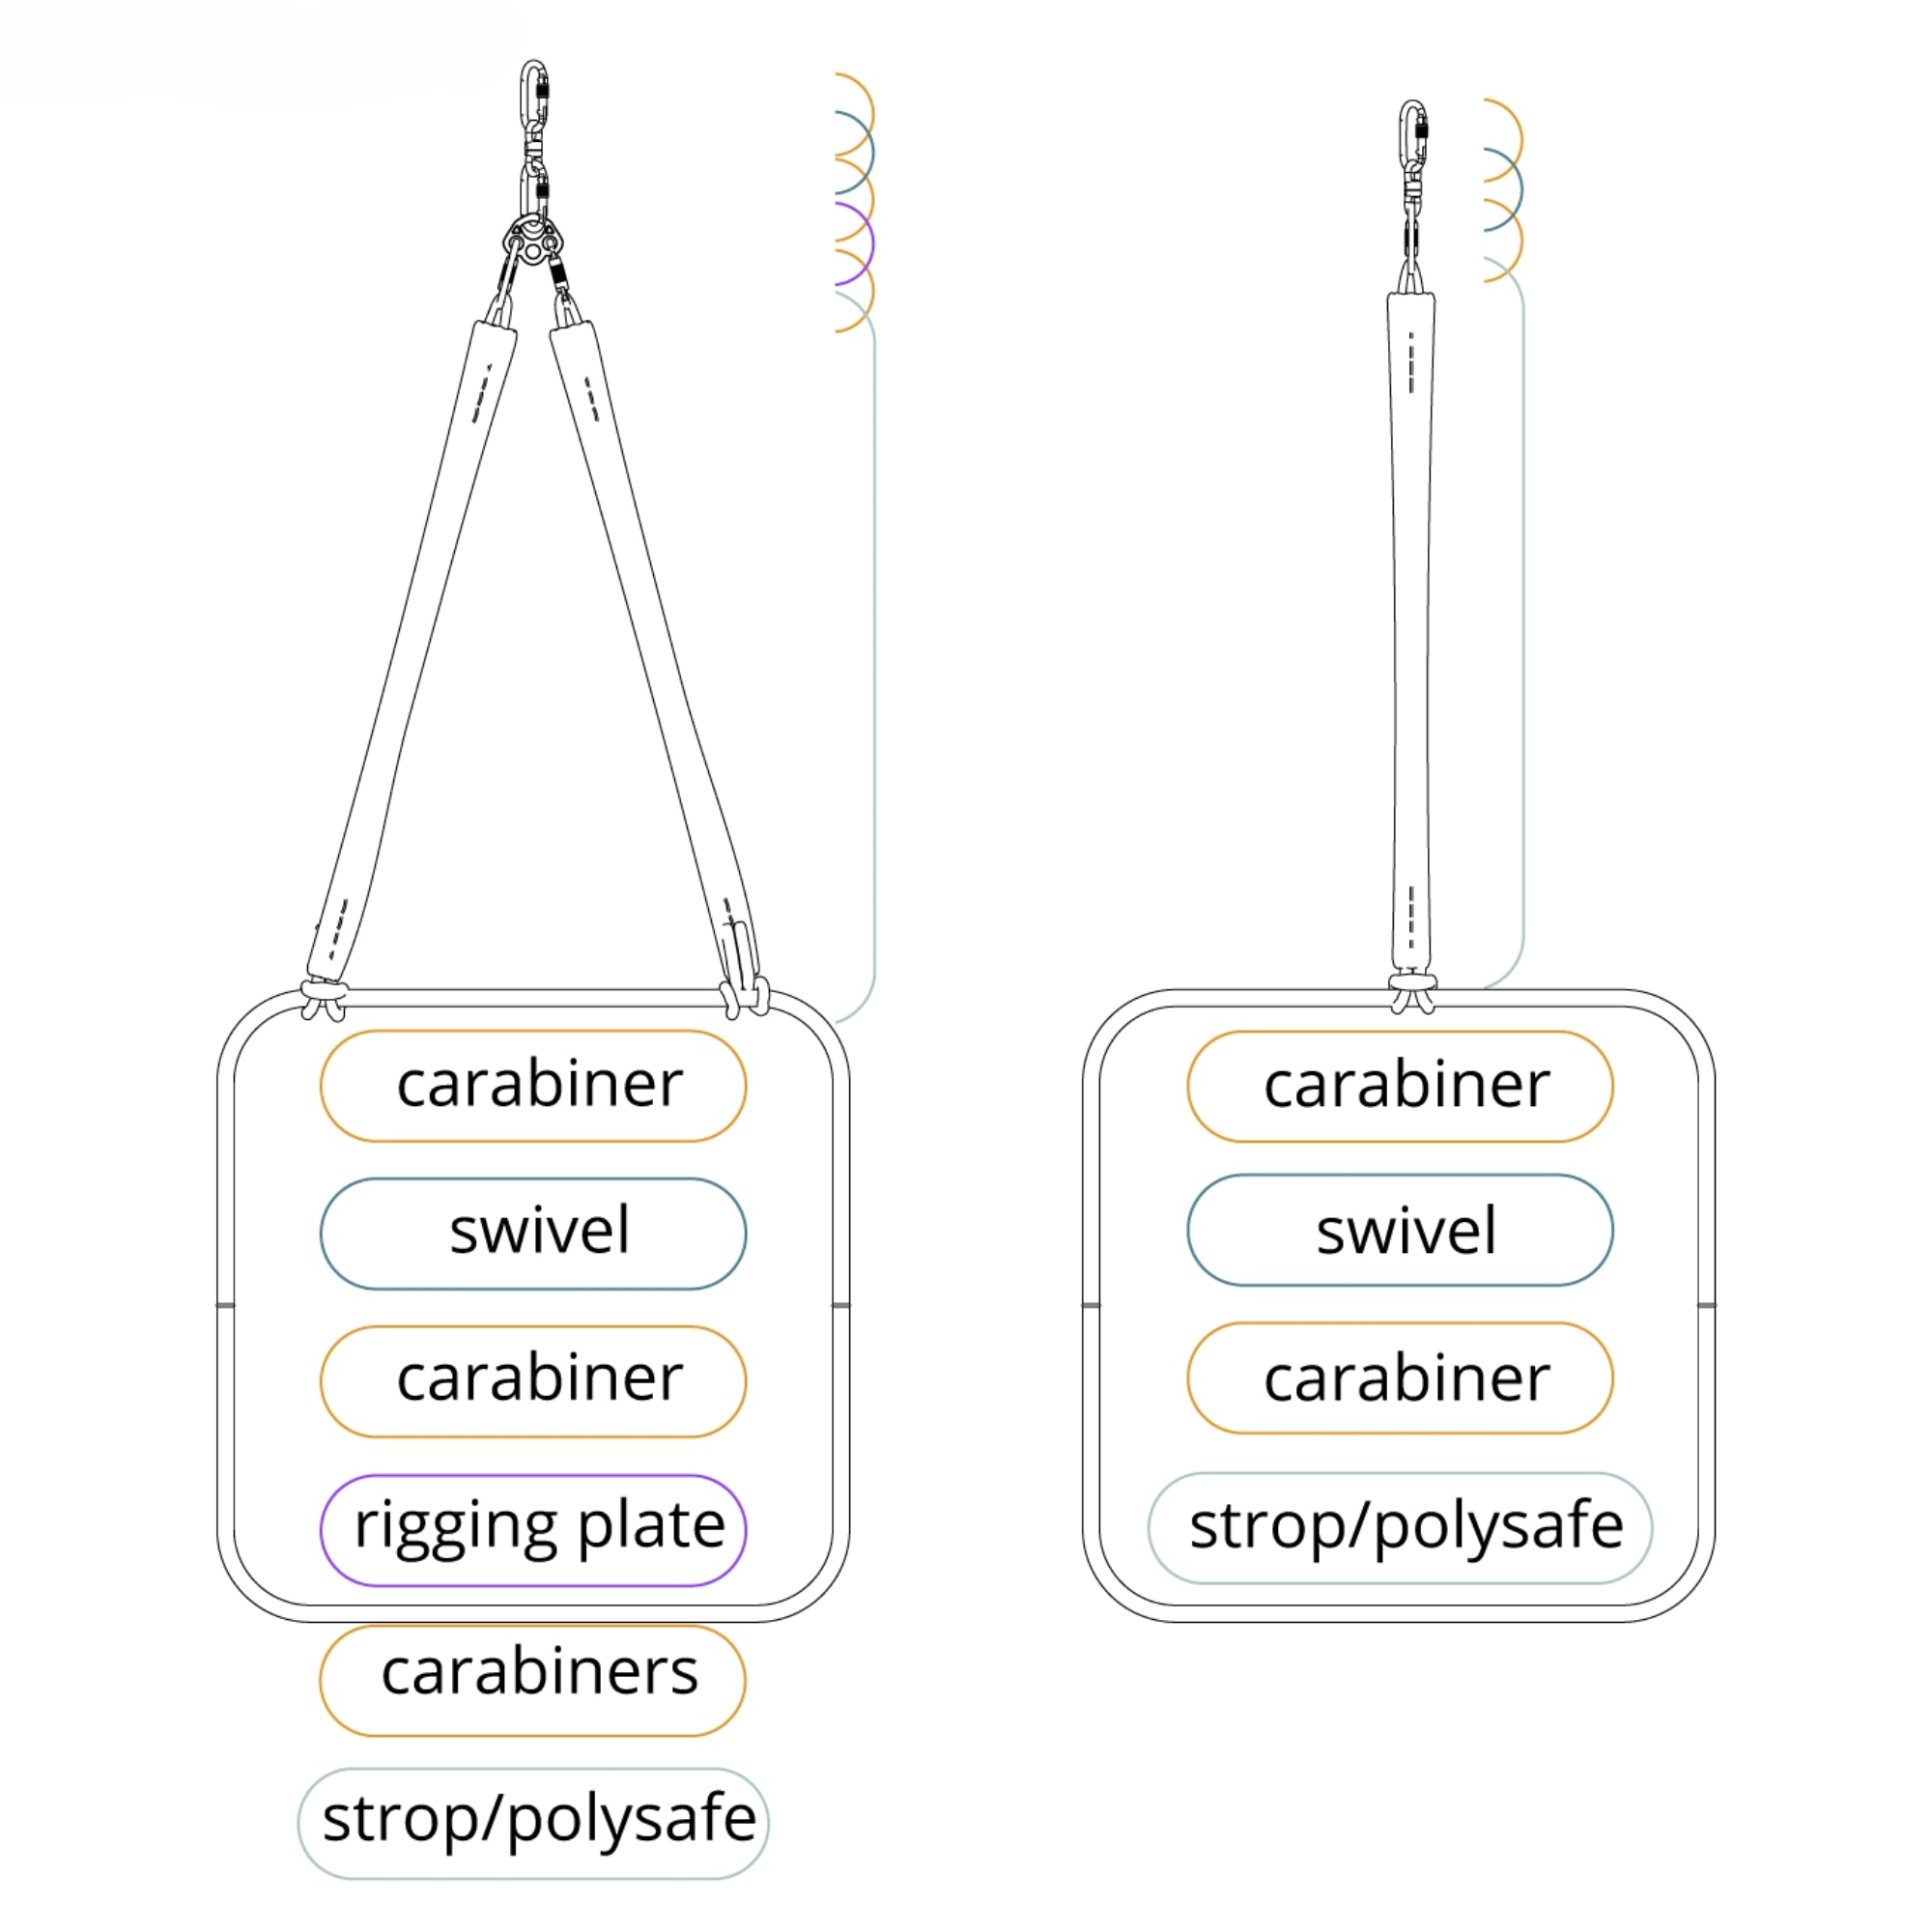 examples of rigging the aerial square with a swivel